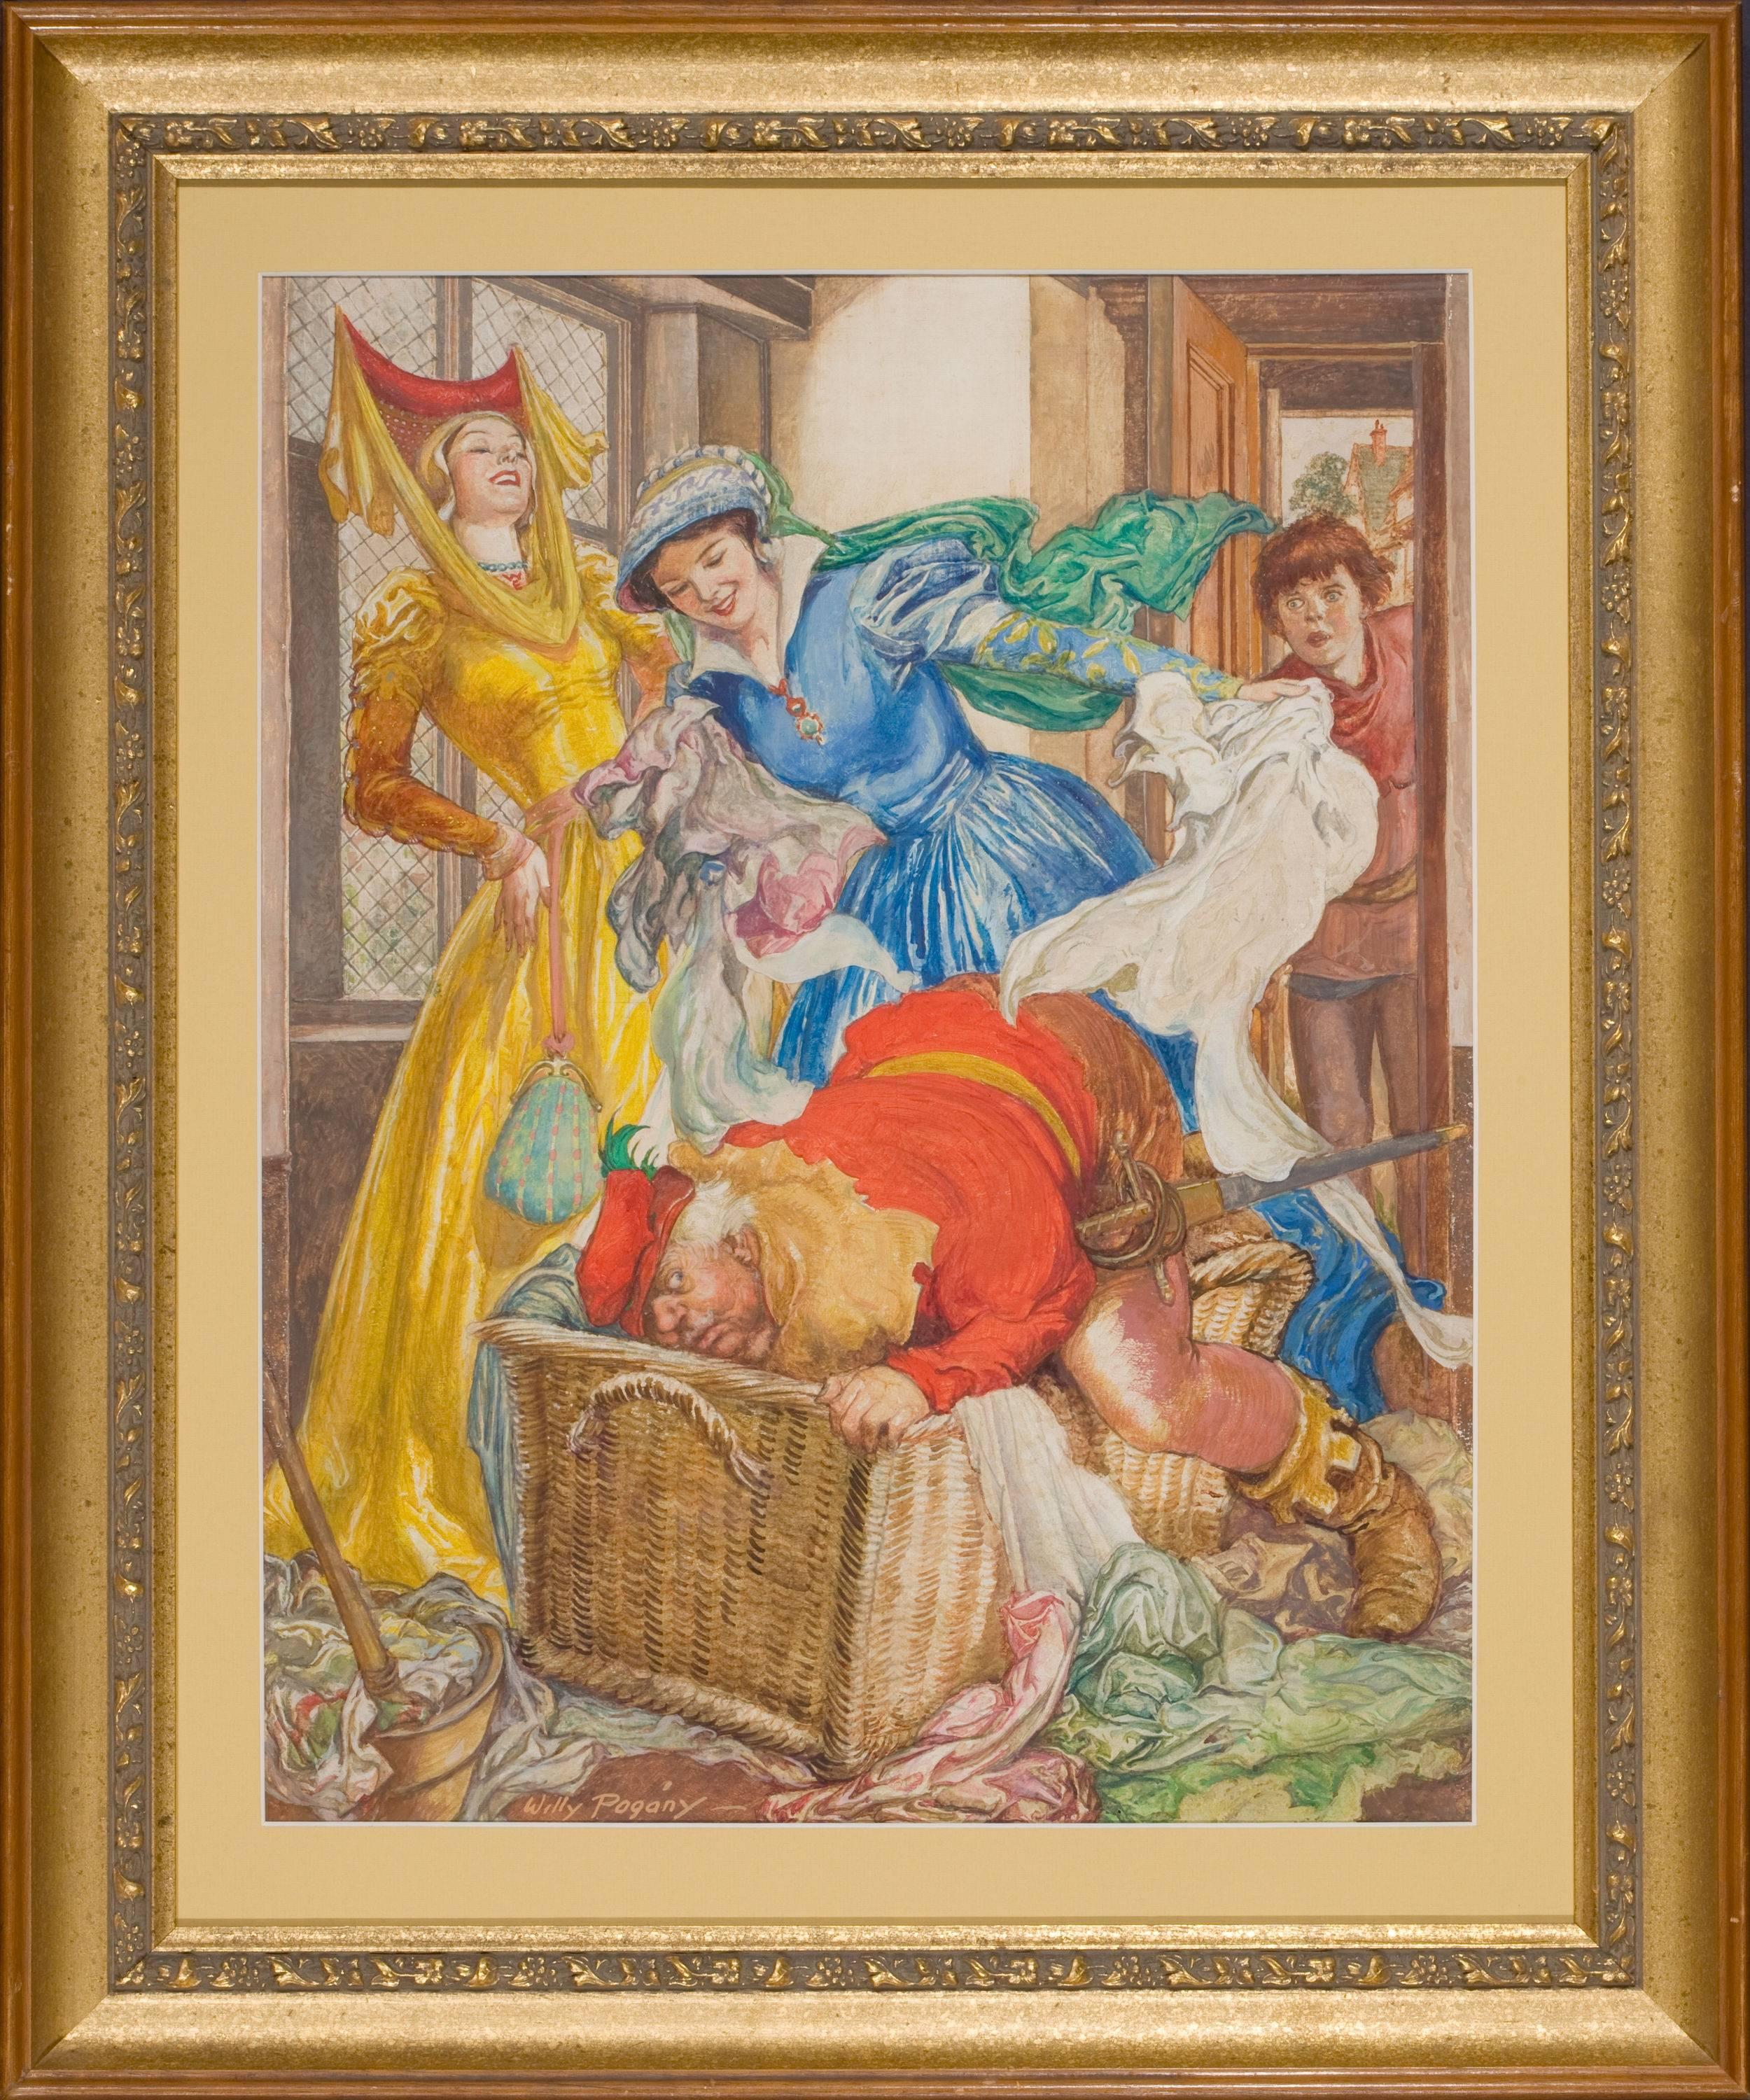 Original cover illustration for The American Weekly, published February 5, 1950. From Pogany’s “Beauties of Shakespeare” cover series for the magazine, this illustration depicts a scene from The Merry Wives of Windsor where Sir John Falstaff hides